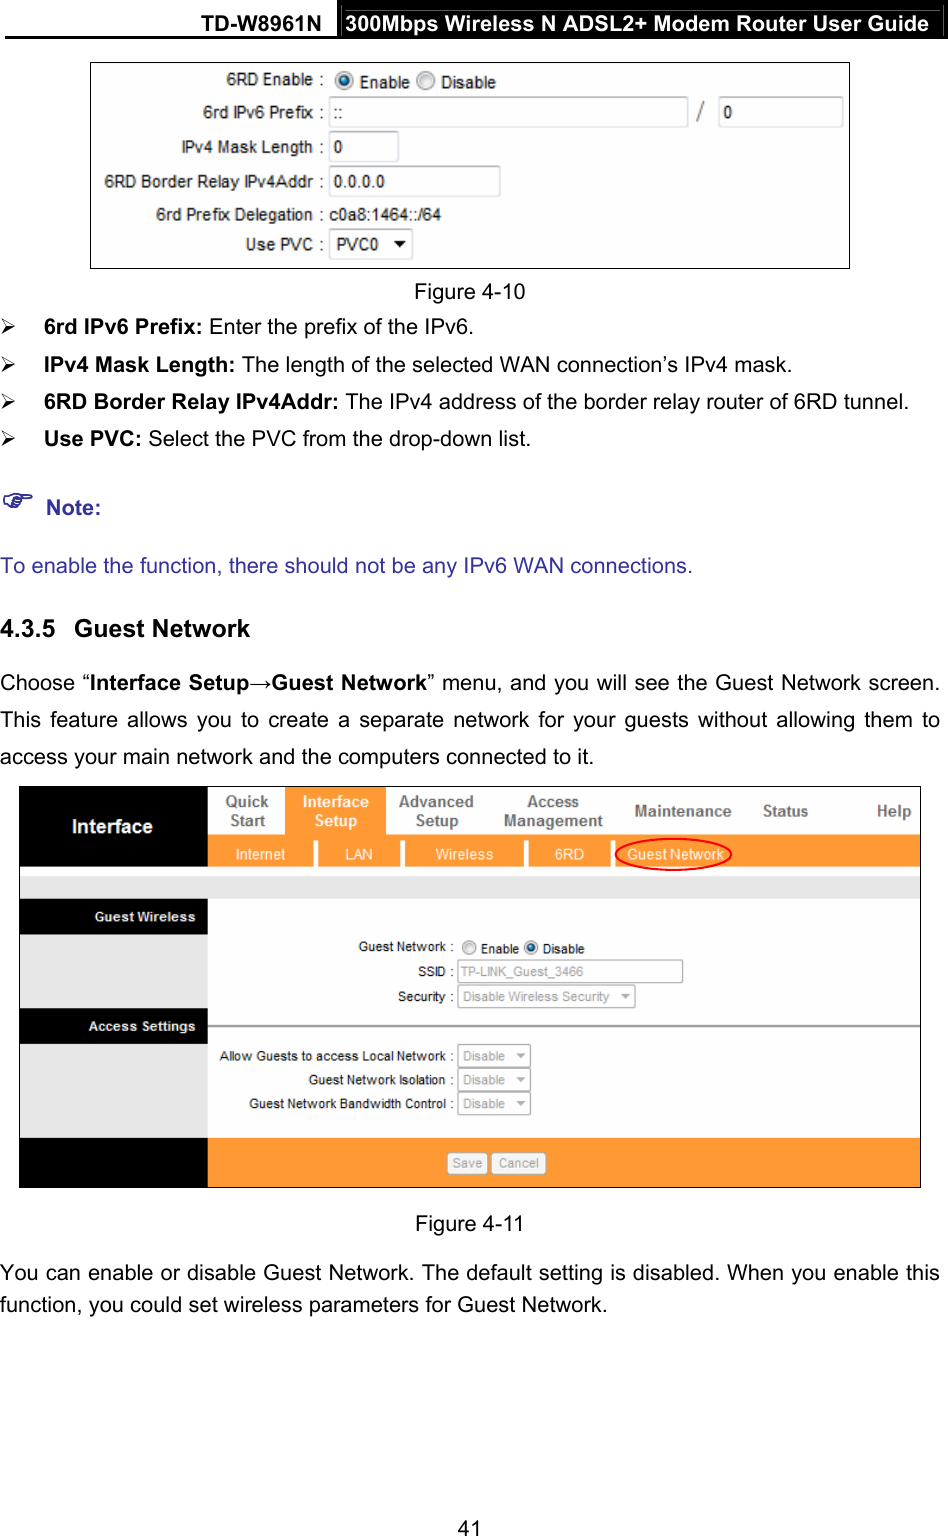 TD-W8961N  300Mbps Wireless N ADSL2+ Modem Router User Guide 41   Figure 4-10  6rd IPv6 Prefix: Enter the prefix of the IPv6.  IPv4 Mask Length: The length of the selected WAN connection’s IPv4 mask.  6RD Border Relay IPv4Addr: The IPv4 address of the border relay router of 6RD tunnel.  Use PVC: Select the PVC from the drop-down list.  Note: To enable the function, there should not be any IPv6 WAN connections. 4.3.5  Guest Network Choose “Interface Setup→Guest Network” menu, and you will see the Guest Network screen. This feature allows you to create a separate network for your guests without allowing them to access your main network and the computers connected to it.   Figure 4-11 You can enable or disable Guest Network. The default setting is disabled. When you enable this function, you could set wireless parameters for Guest Network. 